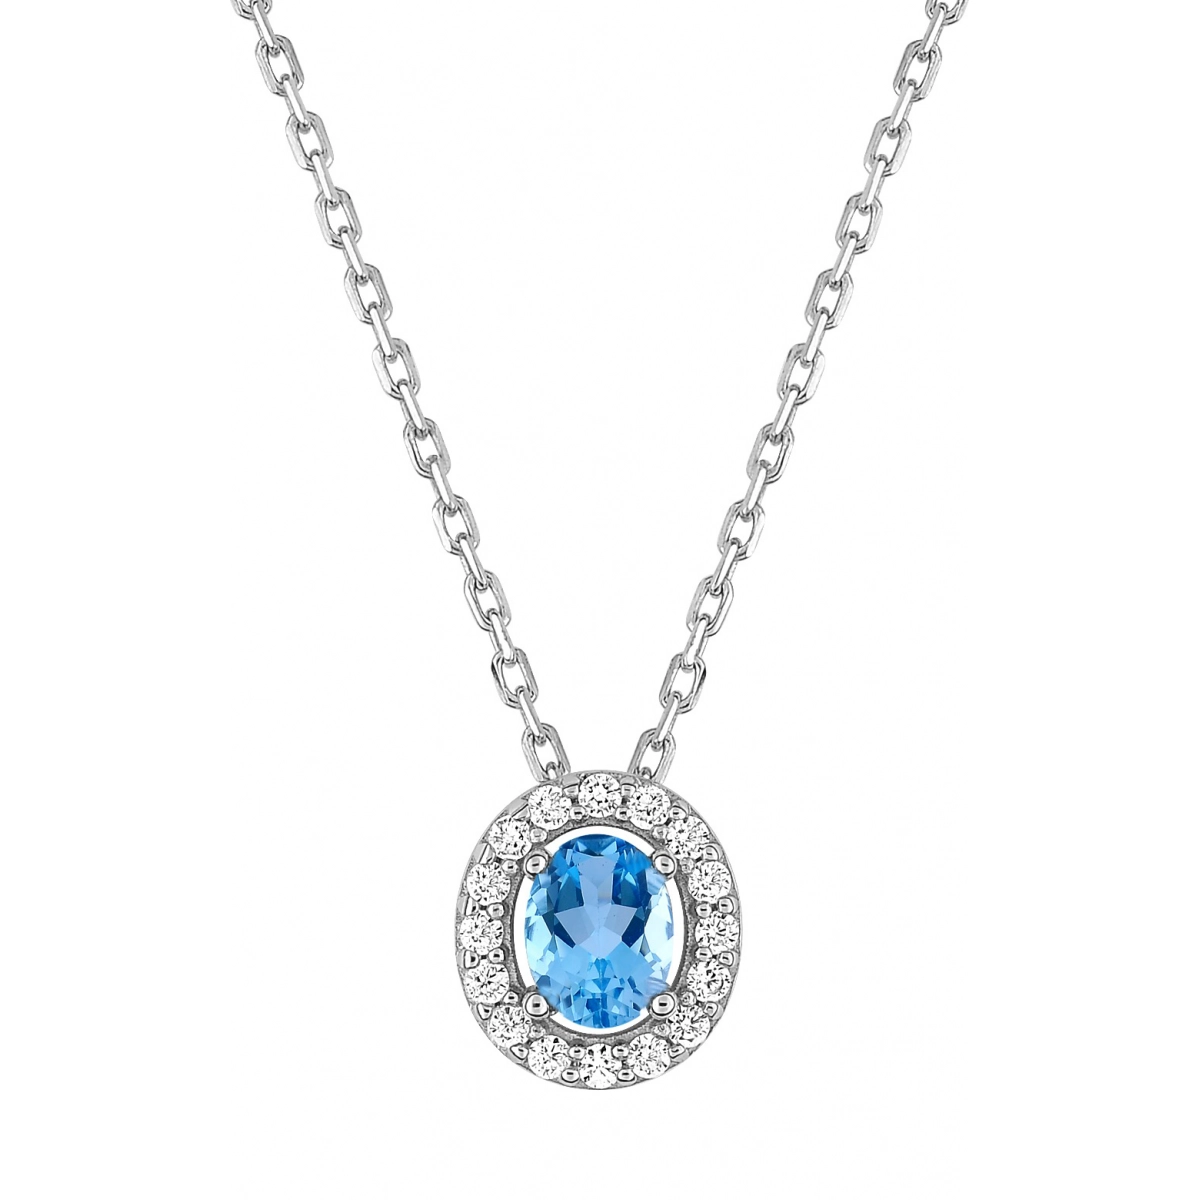 Necklace w. cz and synthetic blue stone rh925 Silver  Lua Blanca  332204.6.0